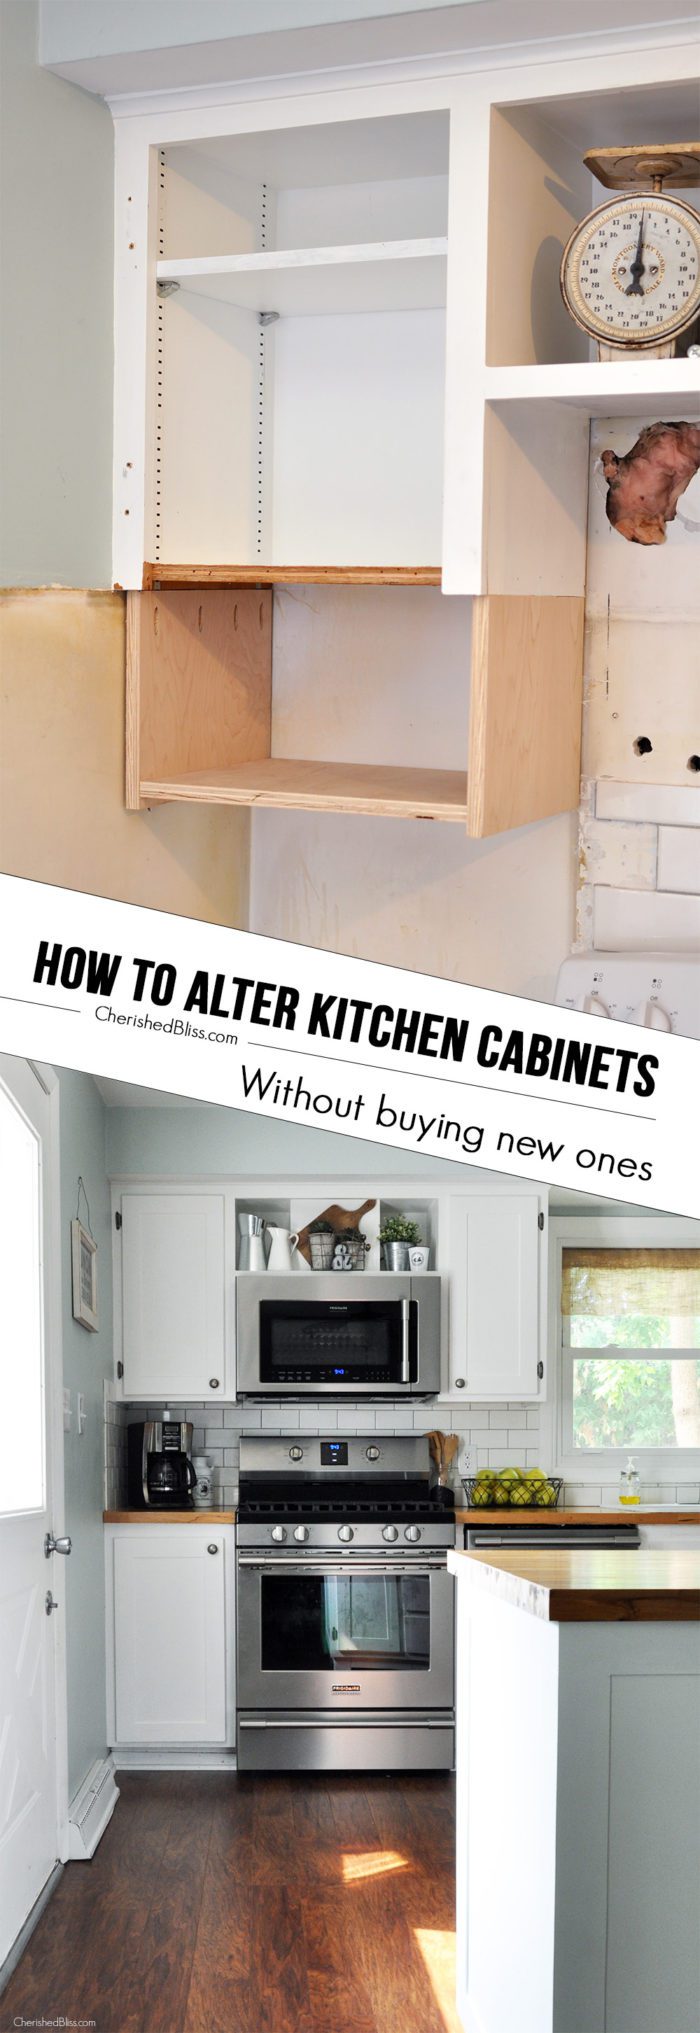 How To Alter Kitchen Cabinets, How To Build A Kitchen Upper Cabinet